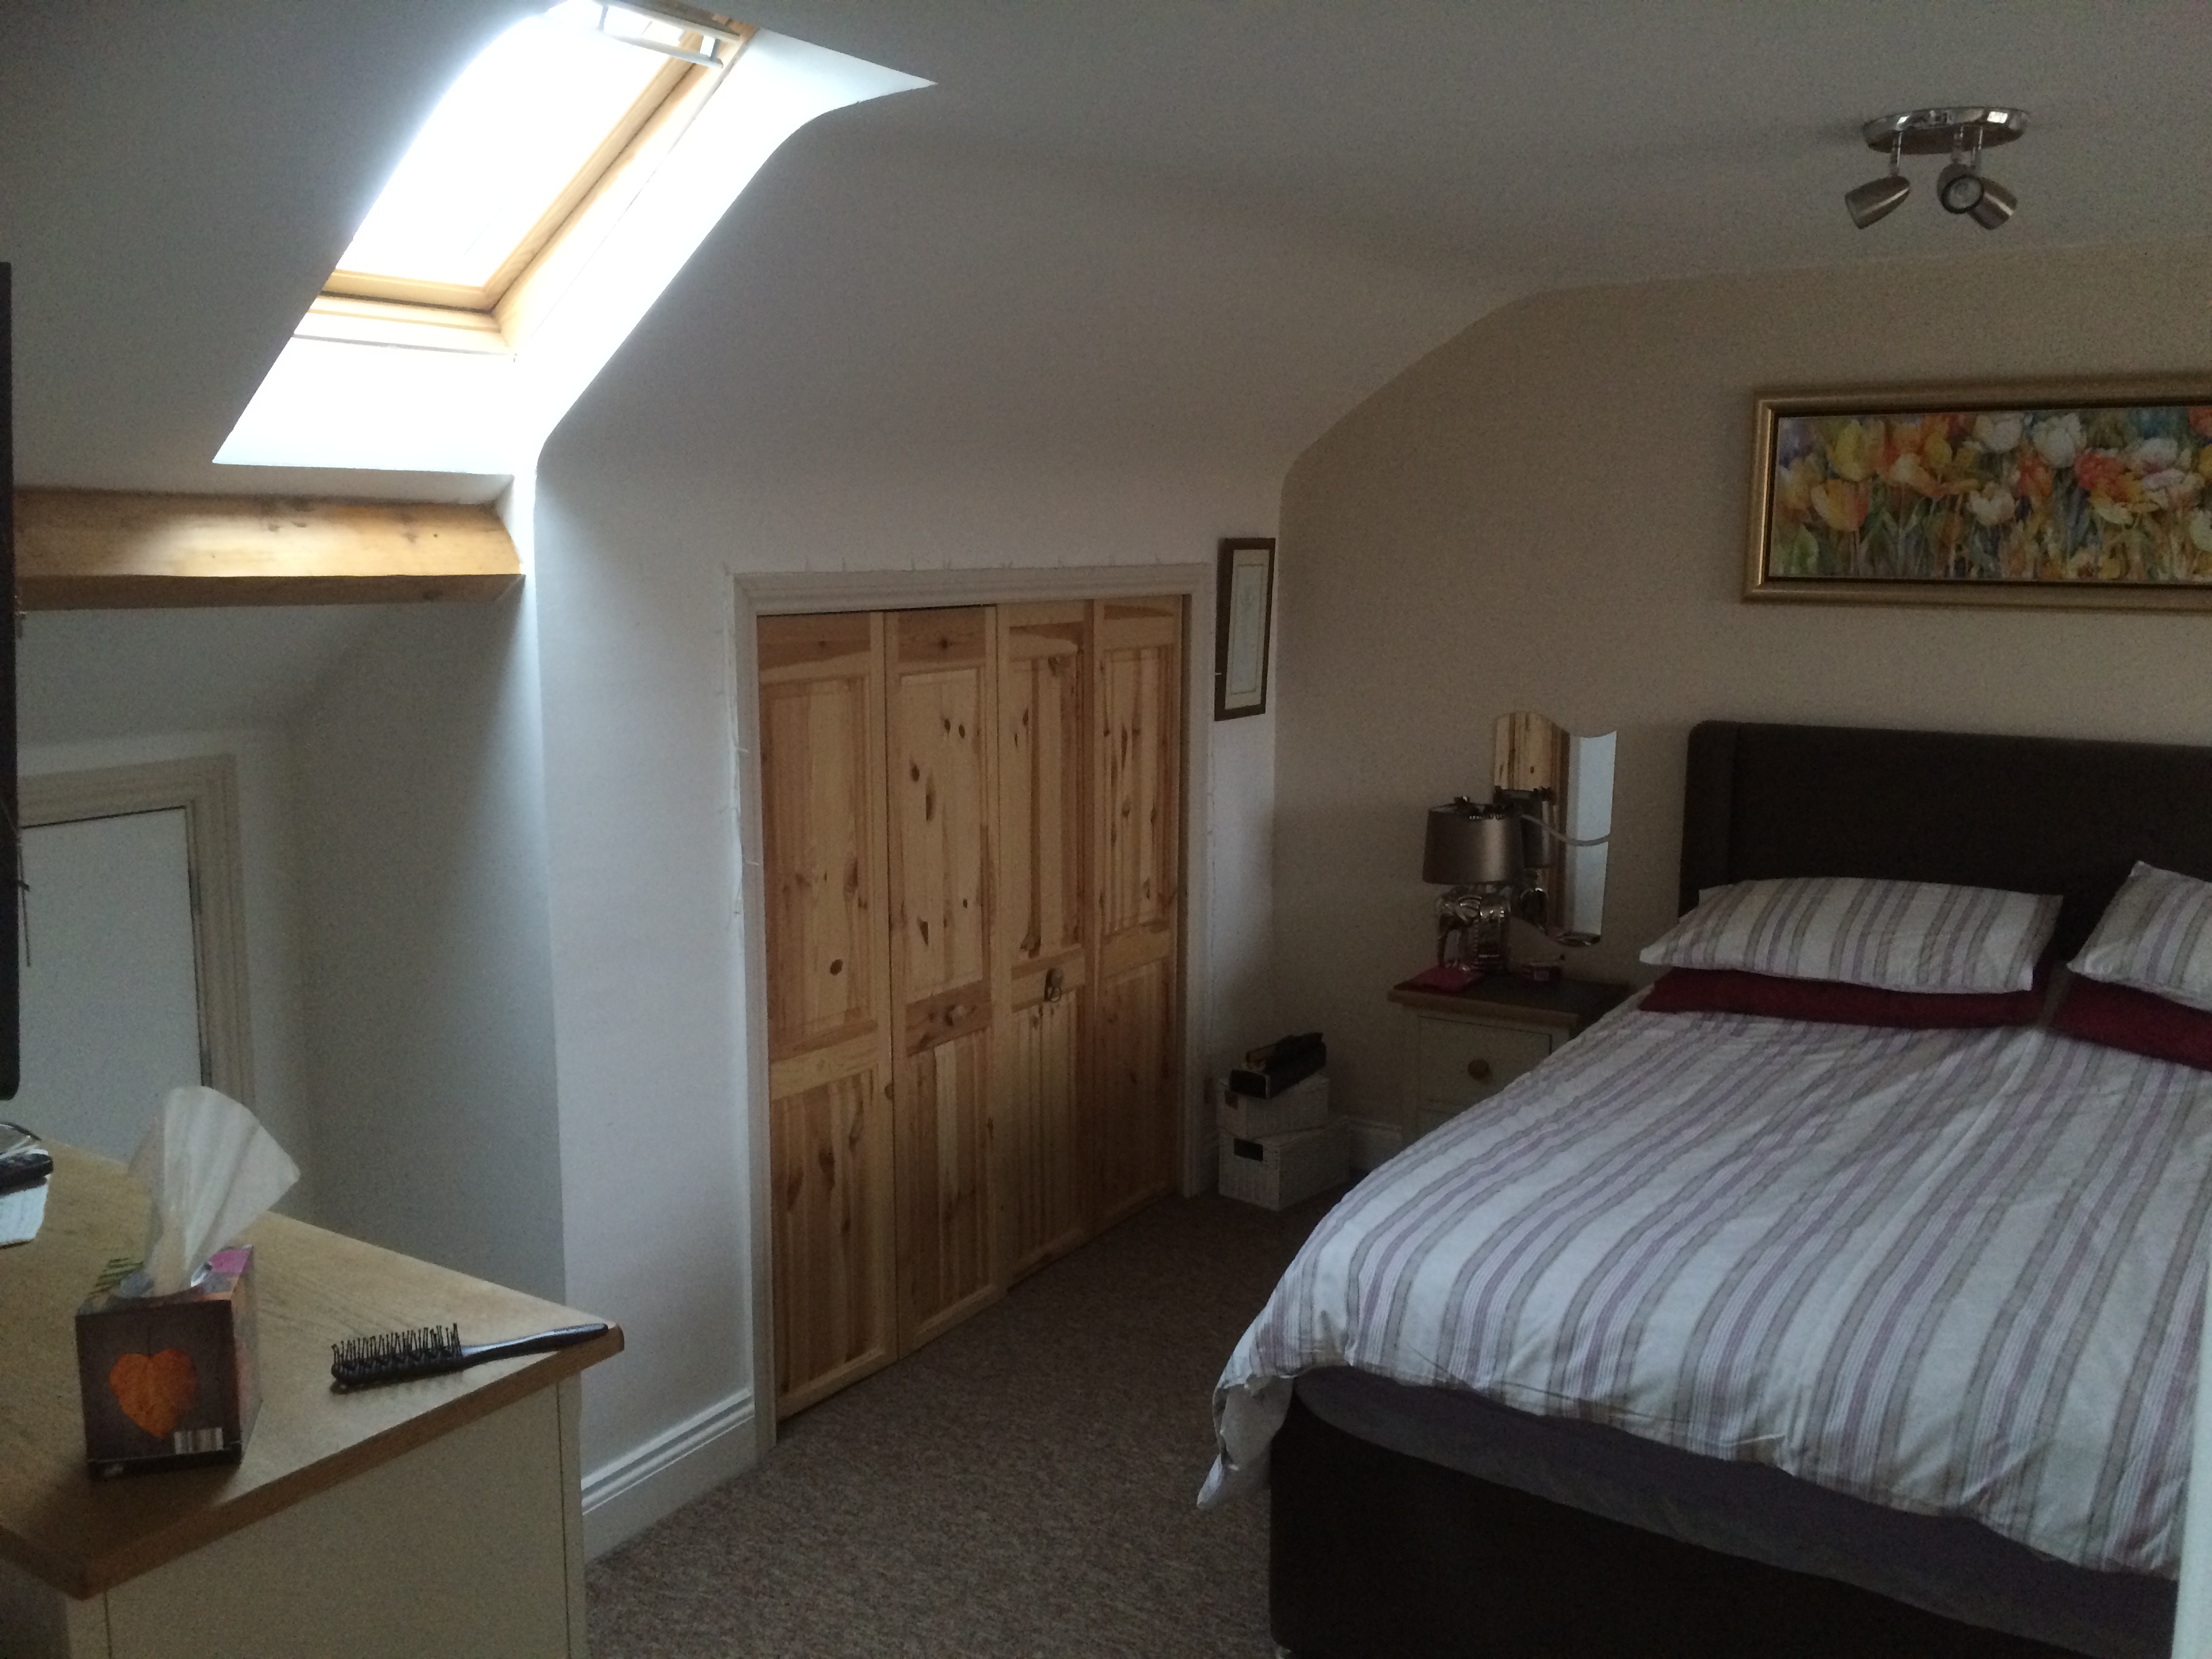 Bedroom loft conversion with built in storage and skylight